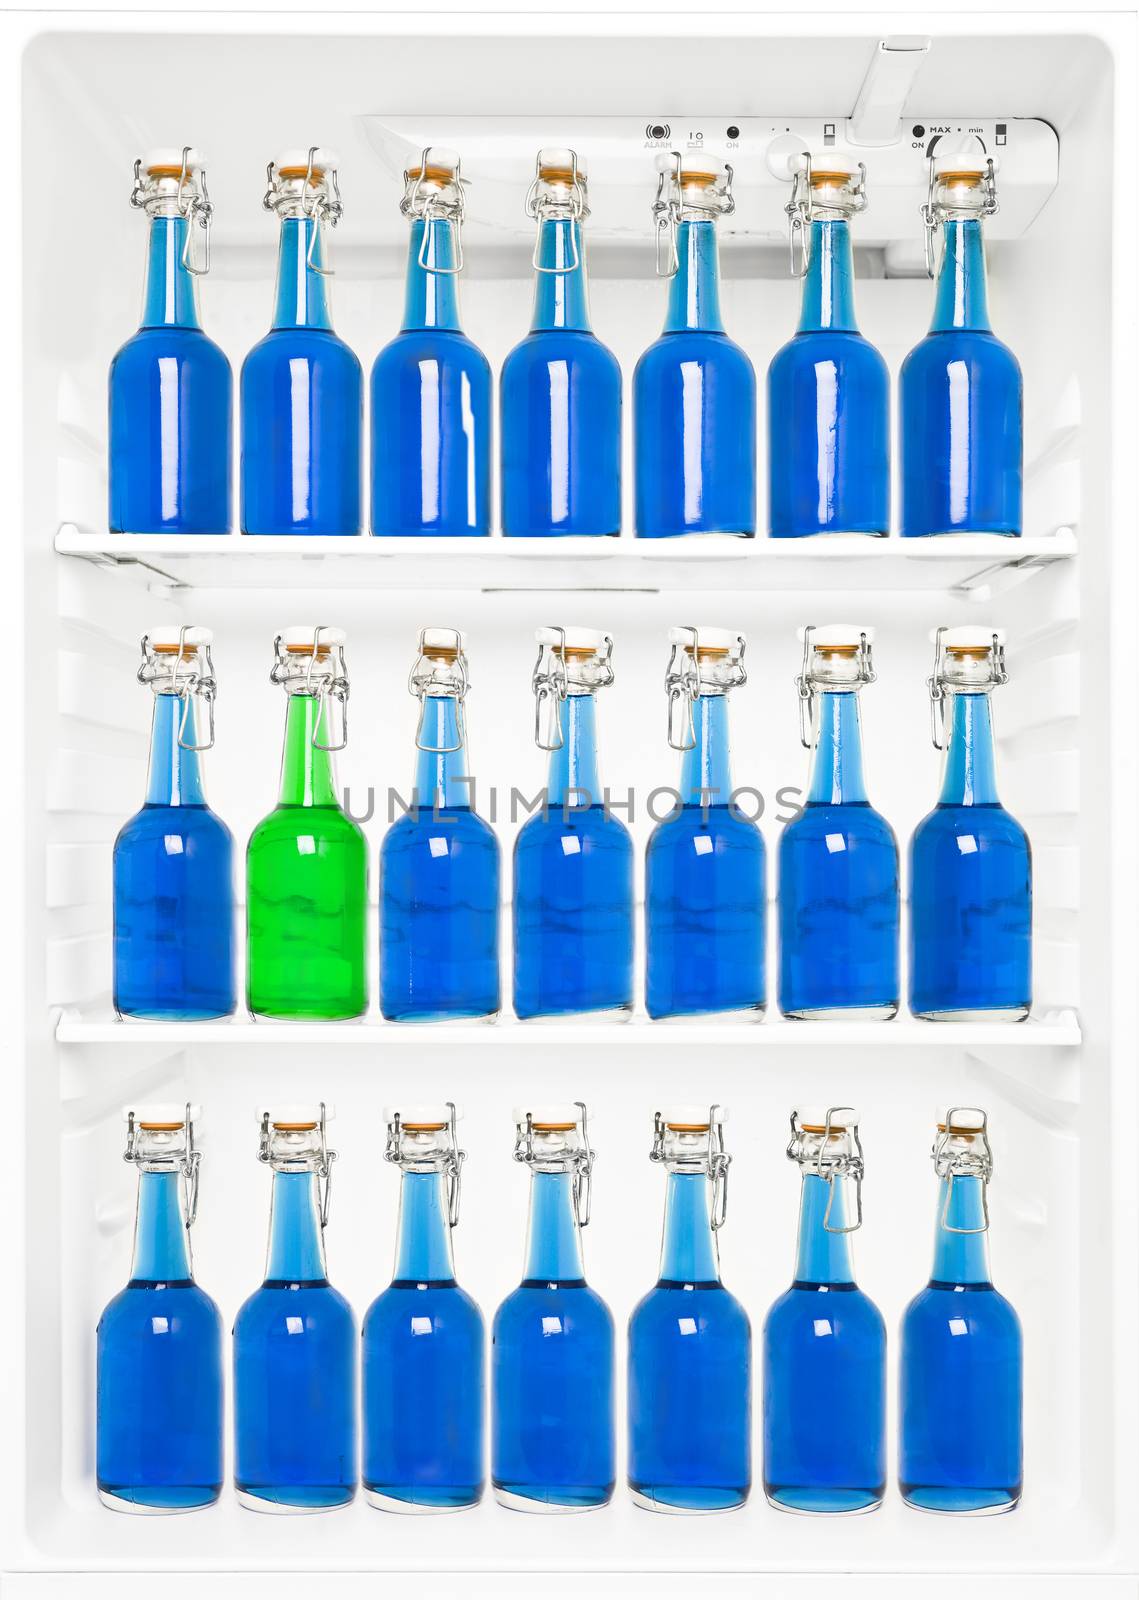 One green Bottle among a large group of blue bottles in a fridge